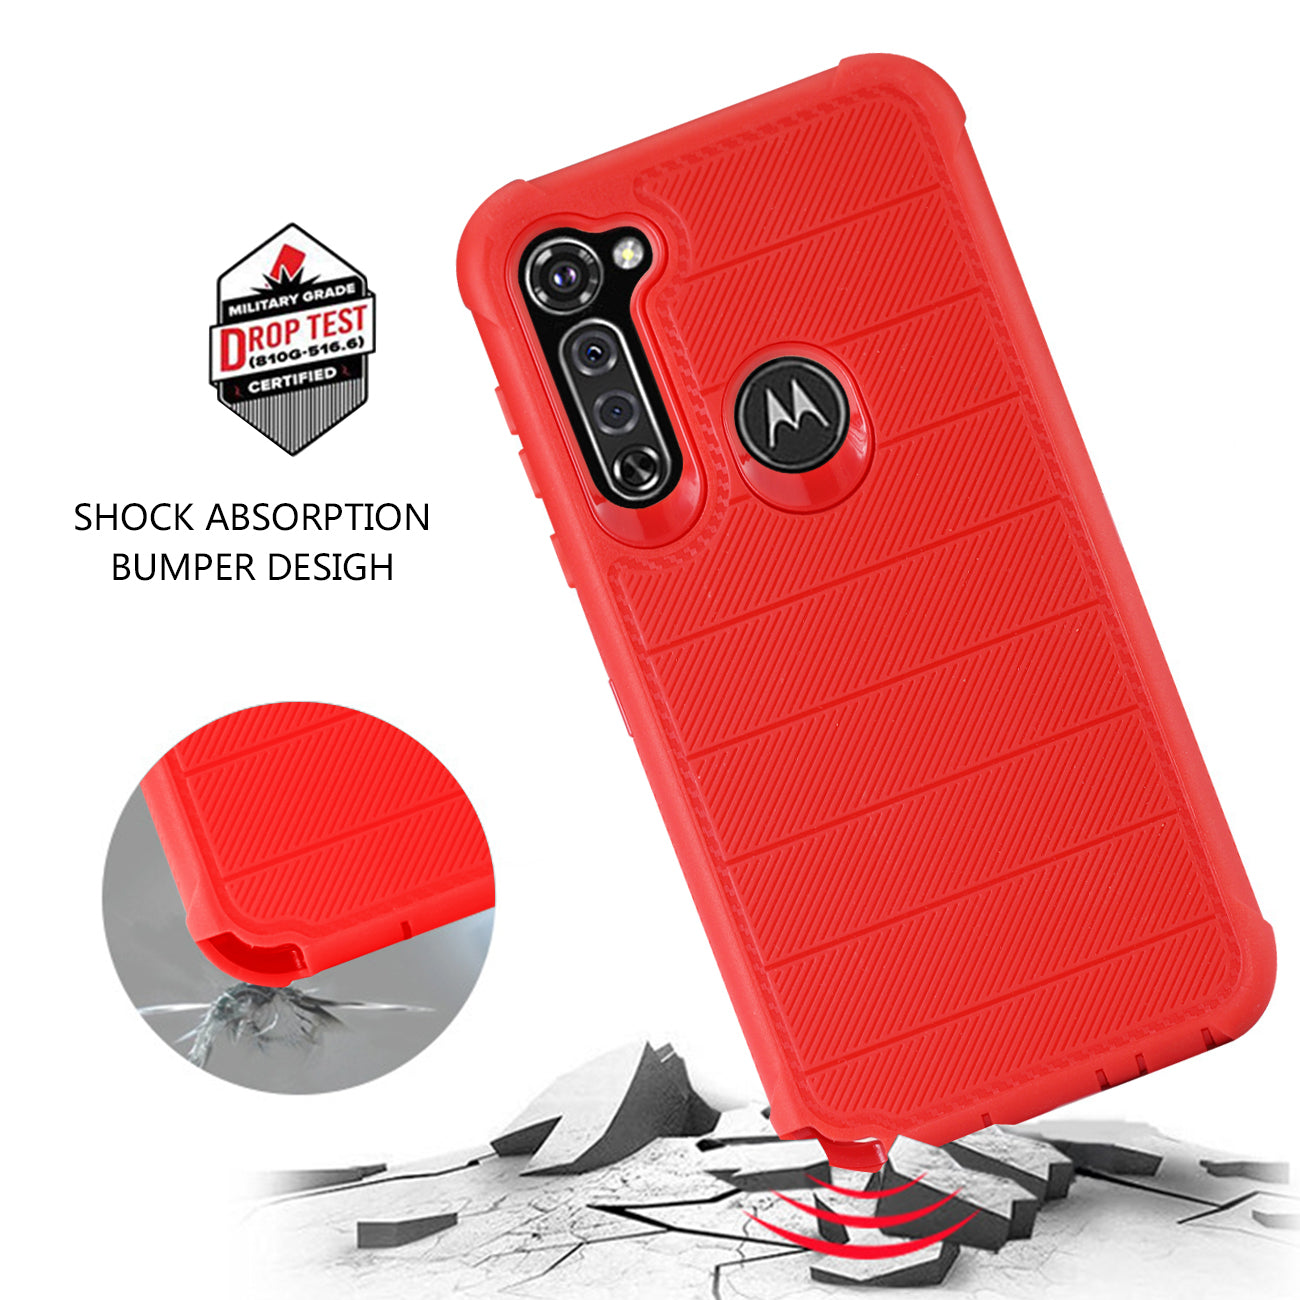 Case Hybrid 3 In 1 Heavy Duty Holster Combo Moto G Stylus Red Color